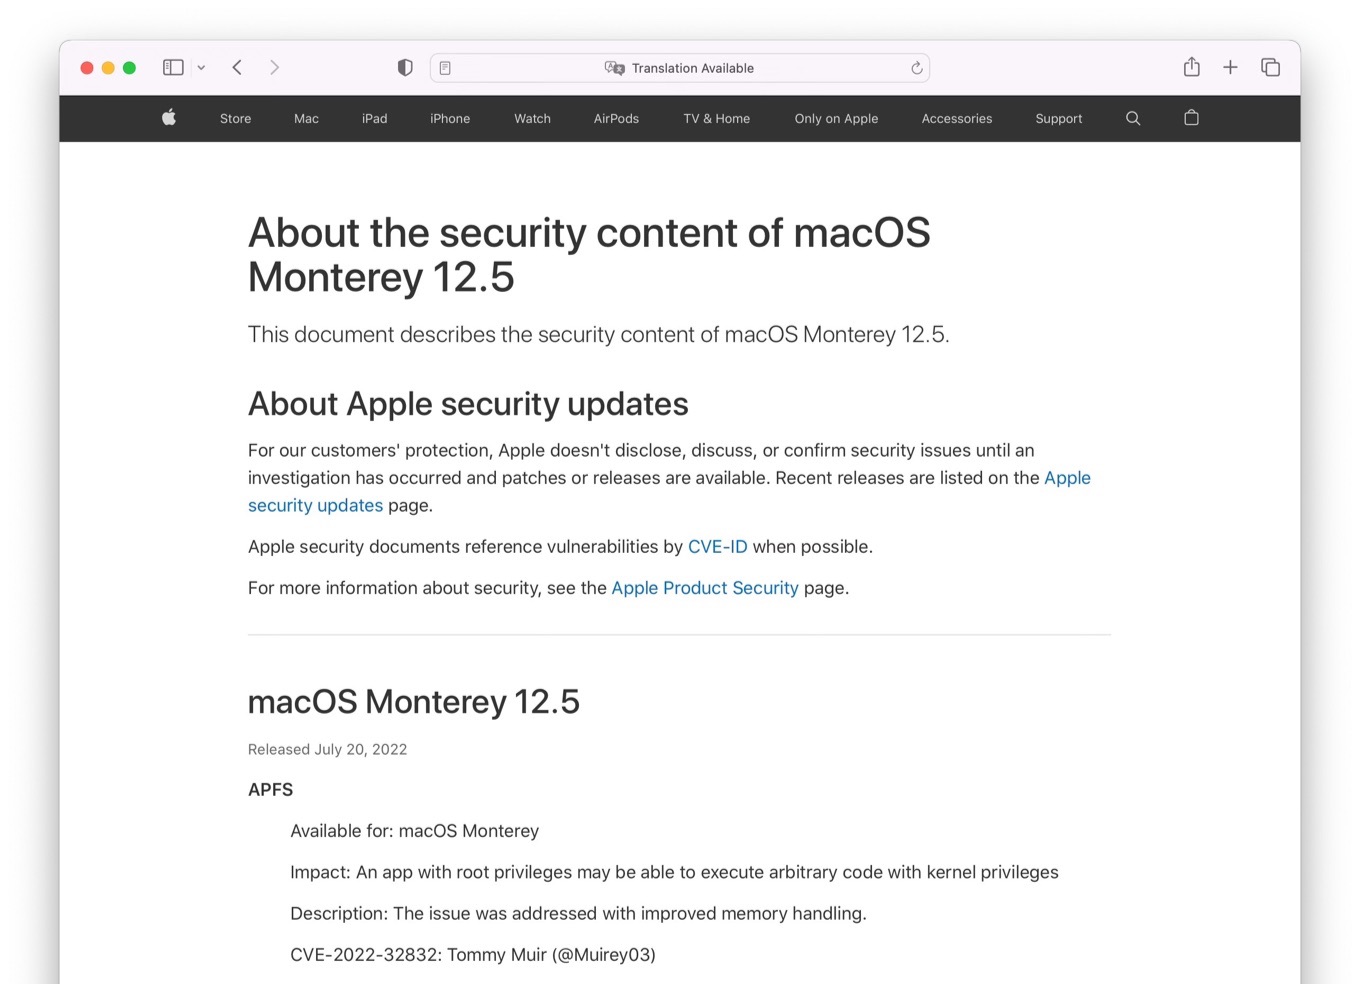 About the security content of macOS Monterey 12.5